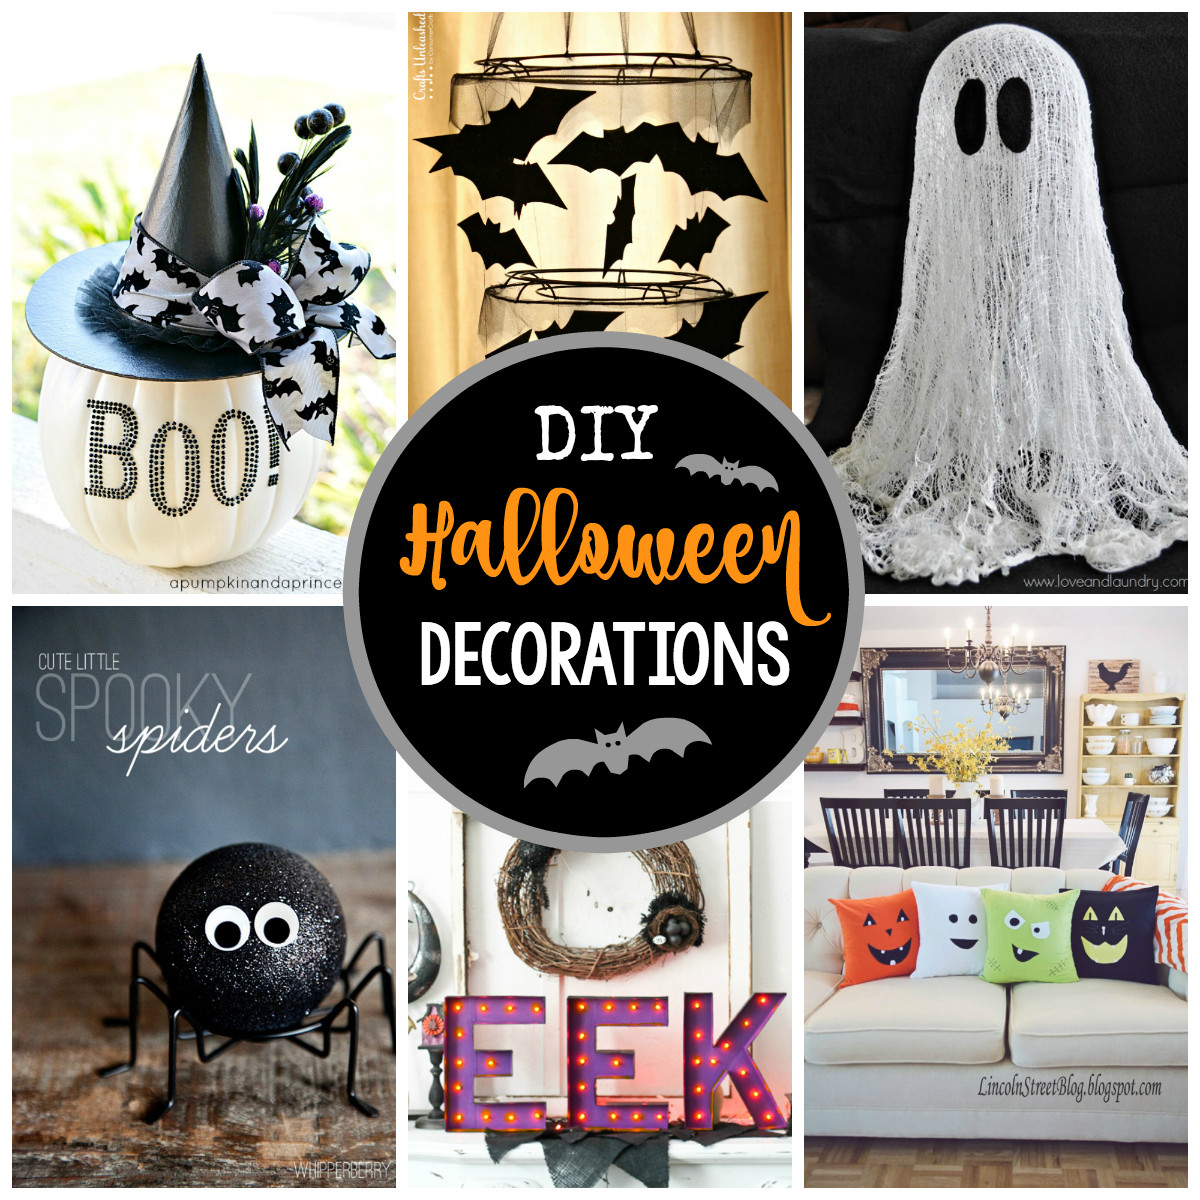 Cute DIY Halloween Decorations
 25 DIY Halloween Decorations to Make This Year Crazy